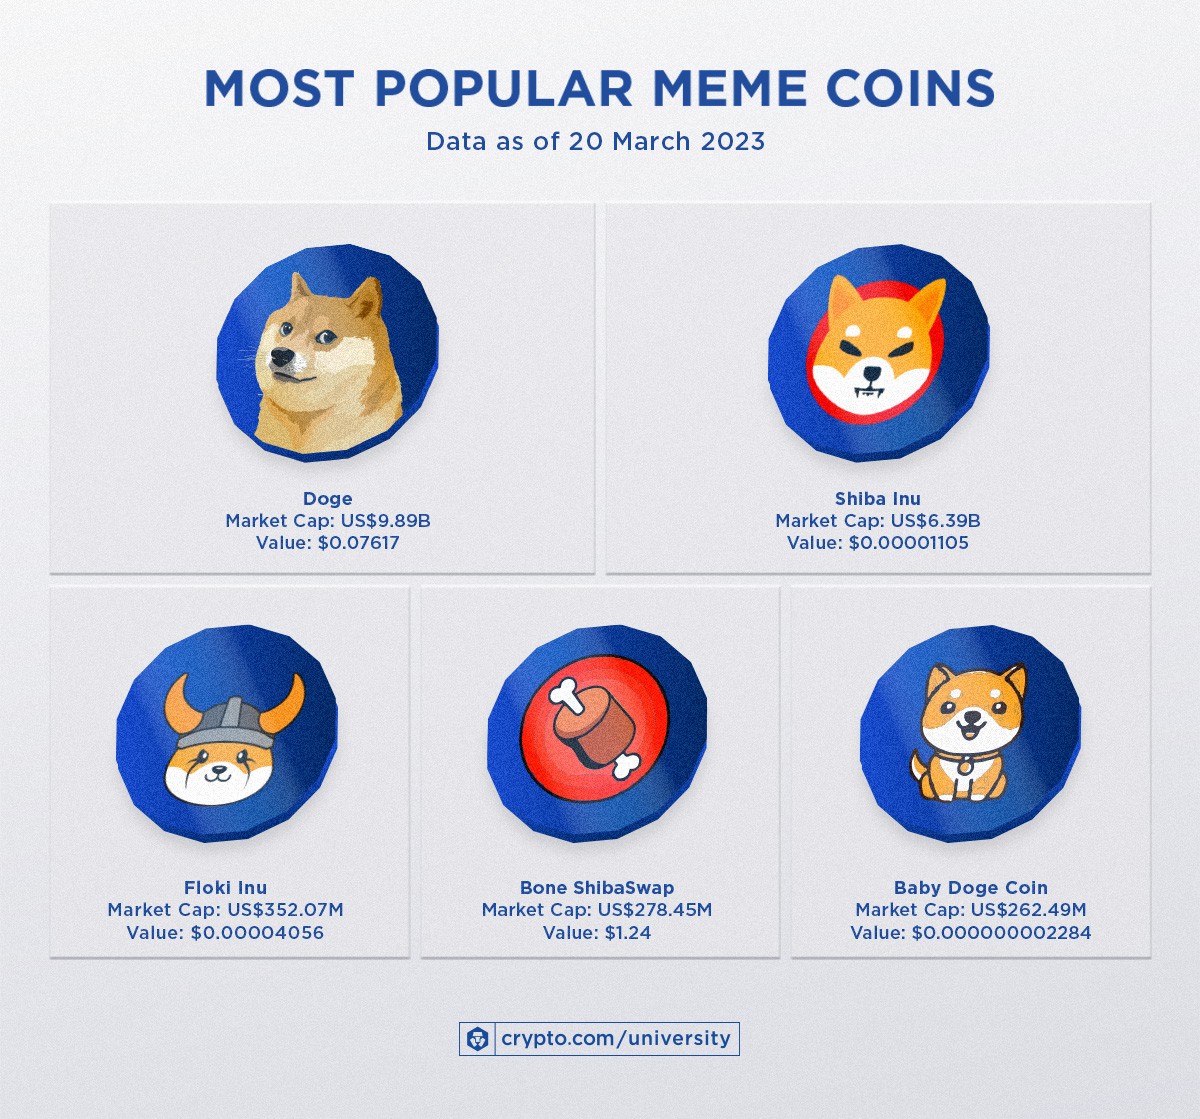 What Are Meme Coins and How Do They Work?